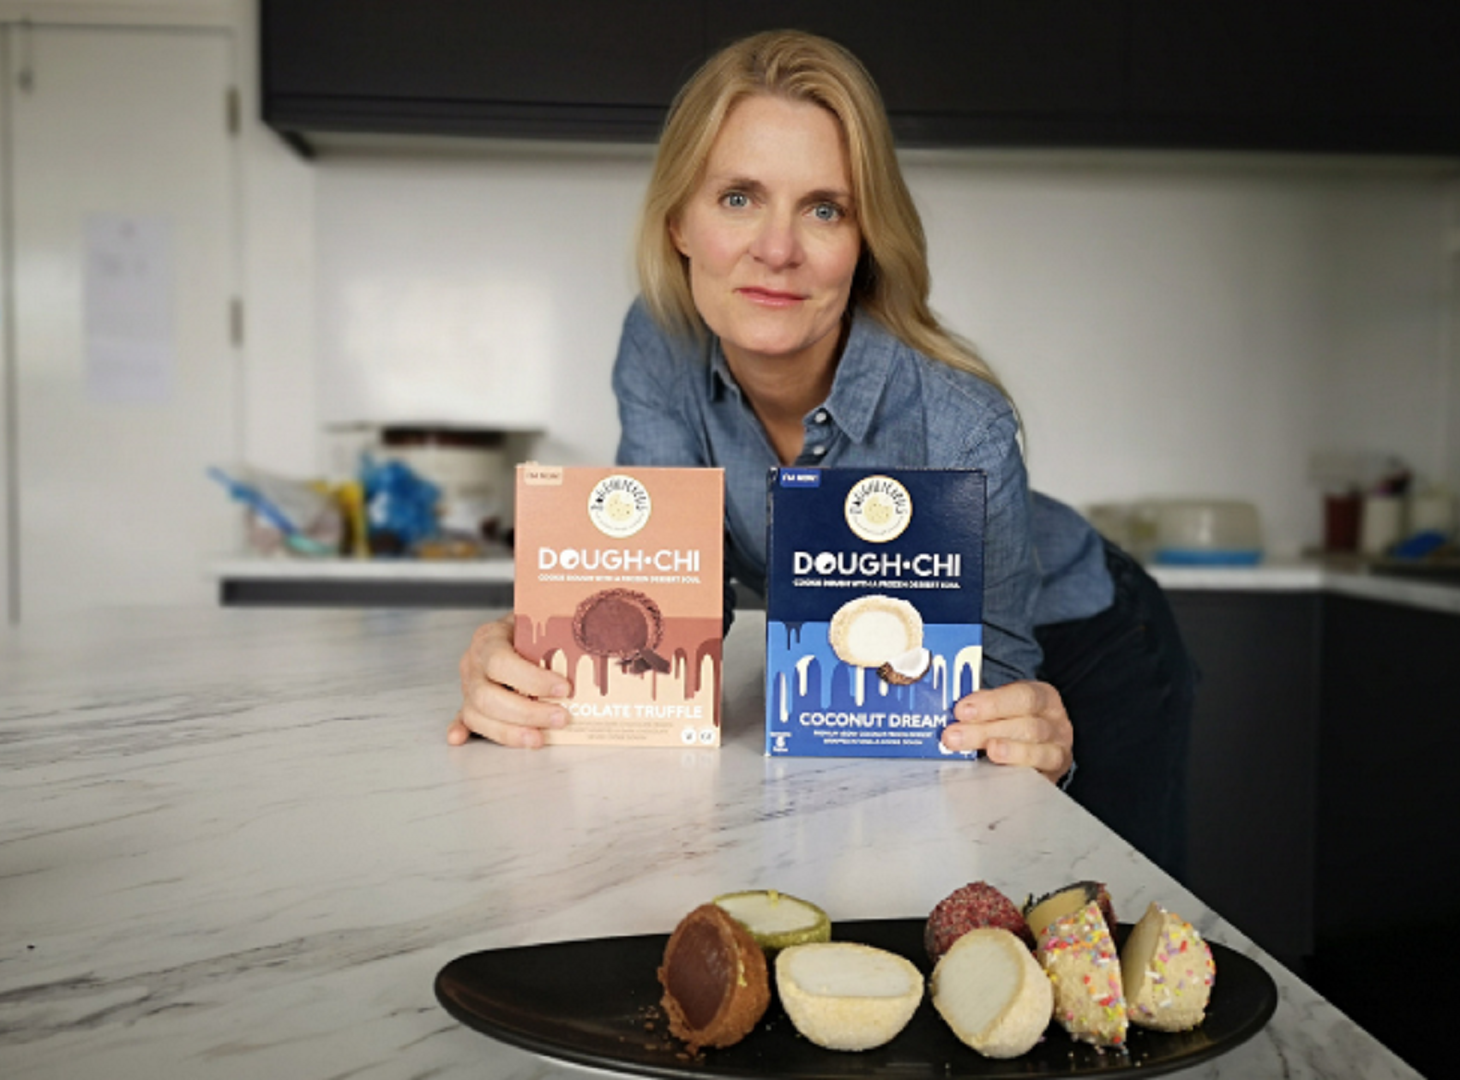 Image of Kathryn Bricken, Founder of Doughlicious